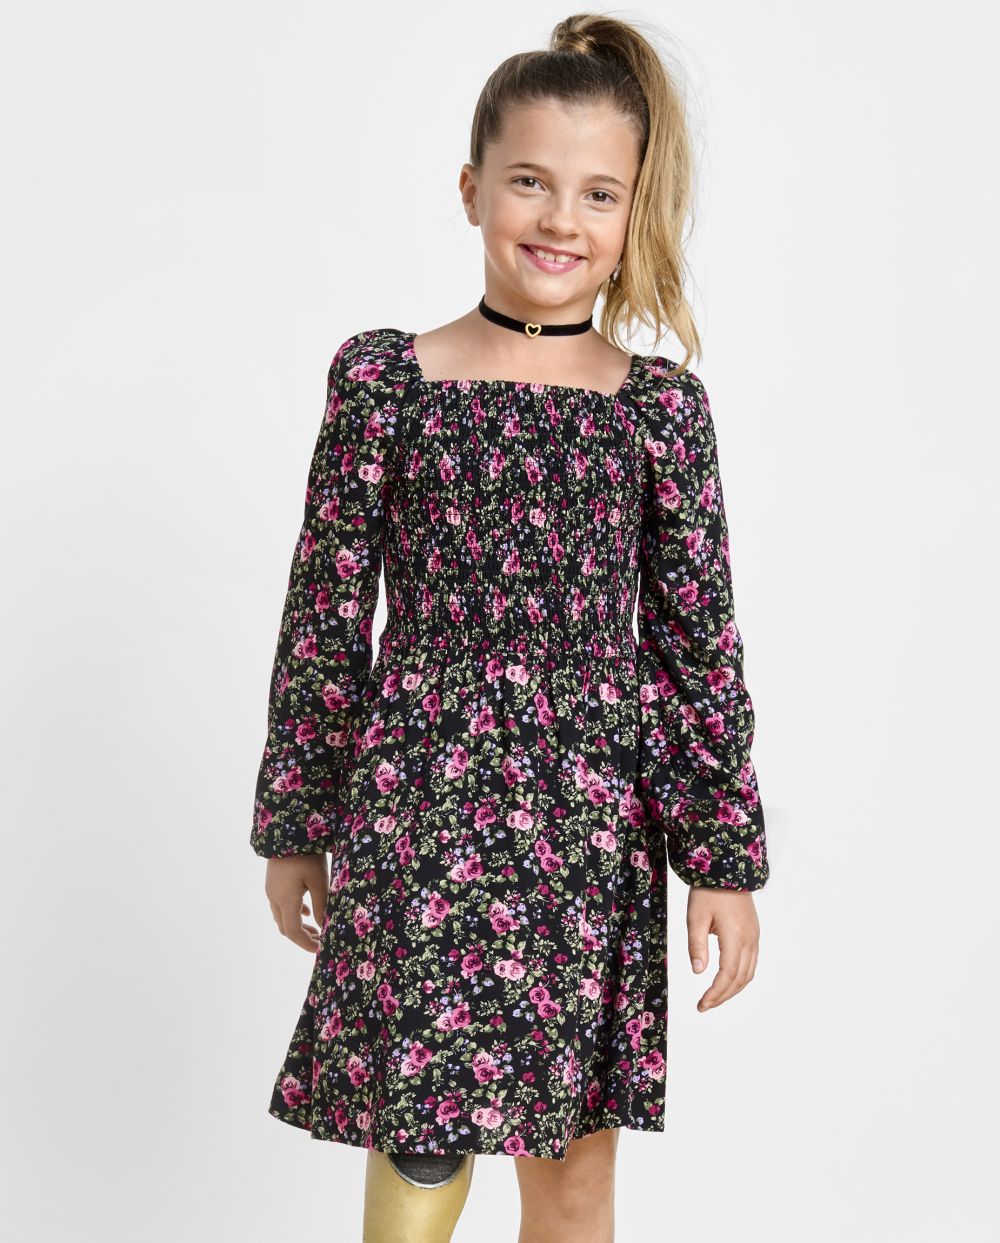 Girls Long Sleeves Smocked Square Neck Above the Knee Floral Print Rayon Dress